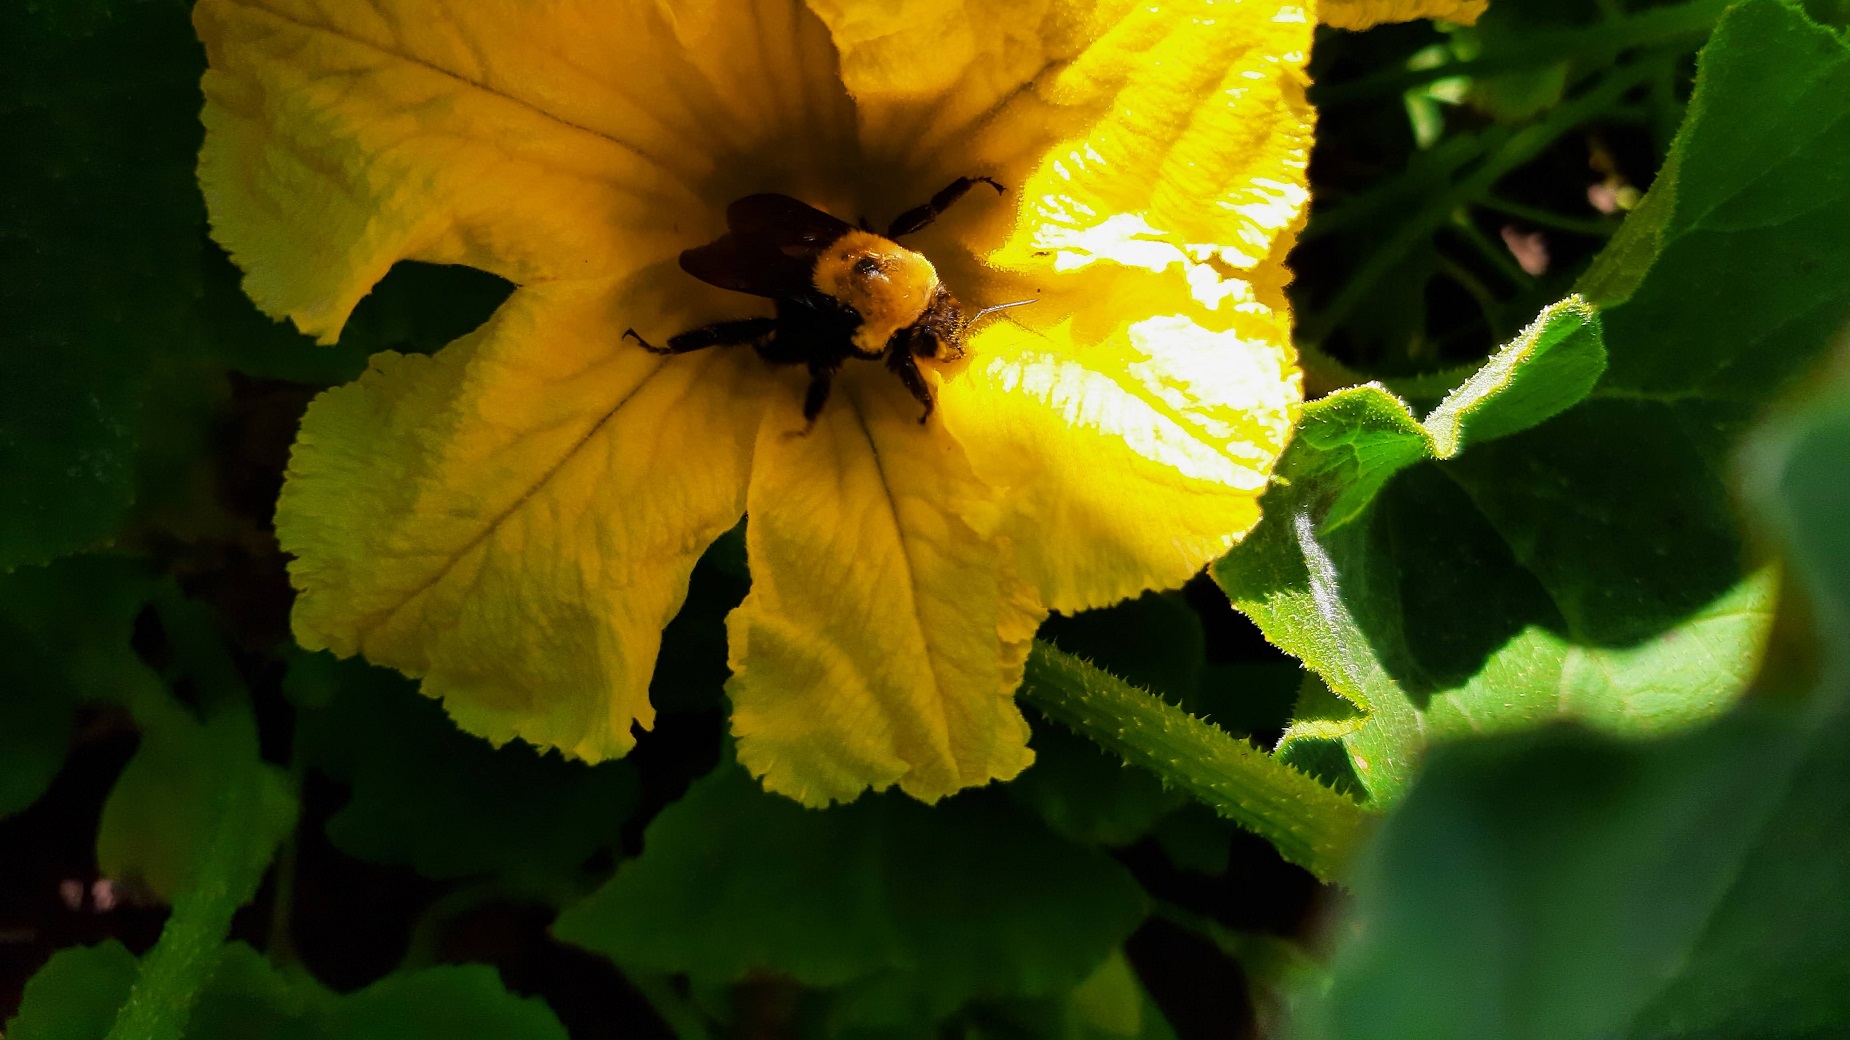 A large bumble bee inside a bright yellow squash flower